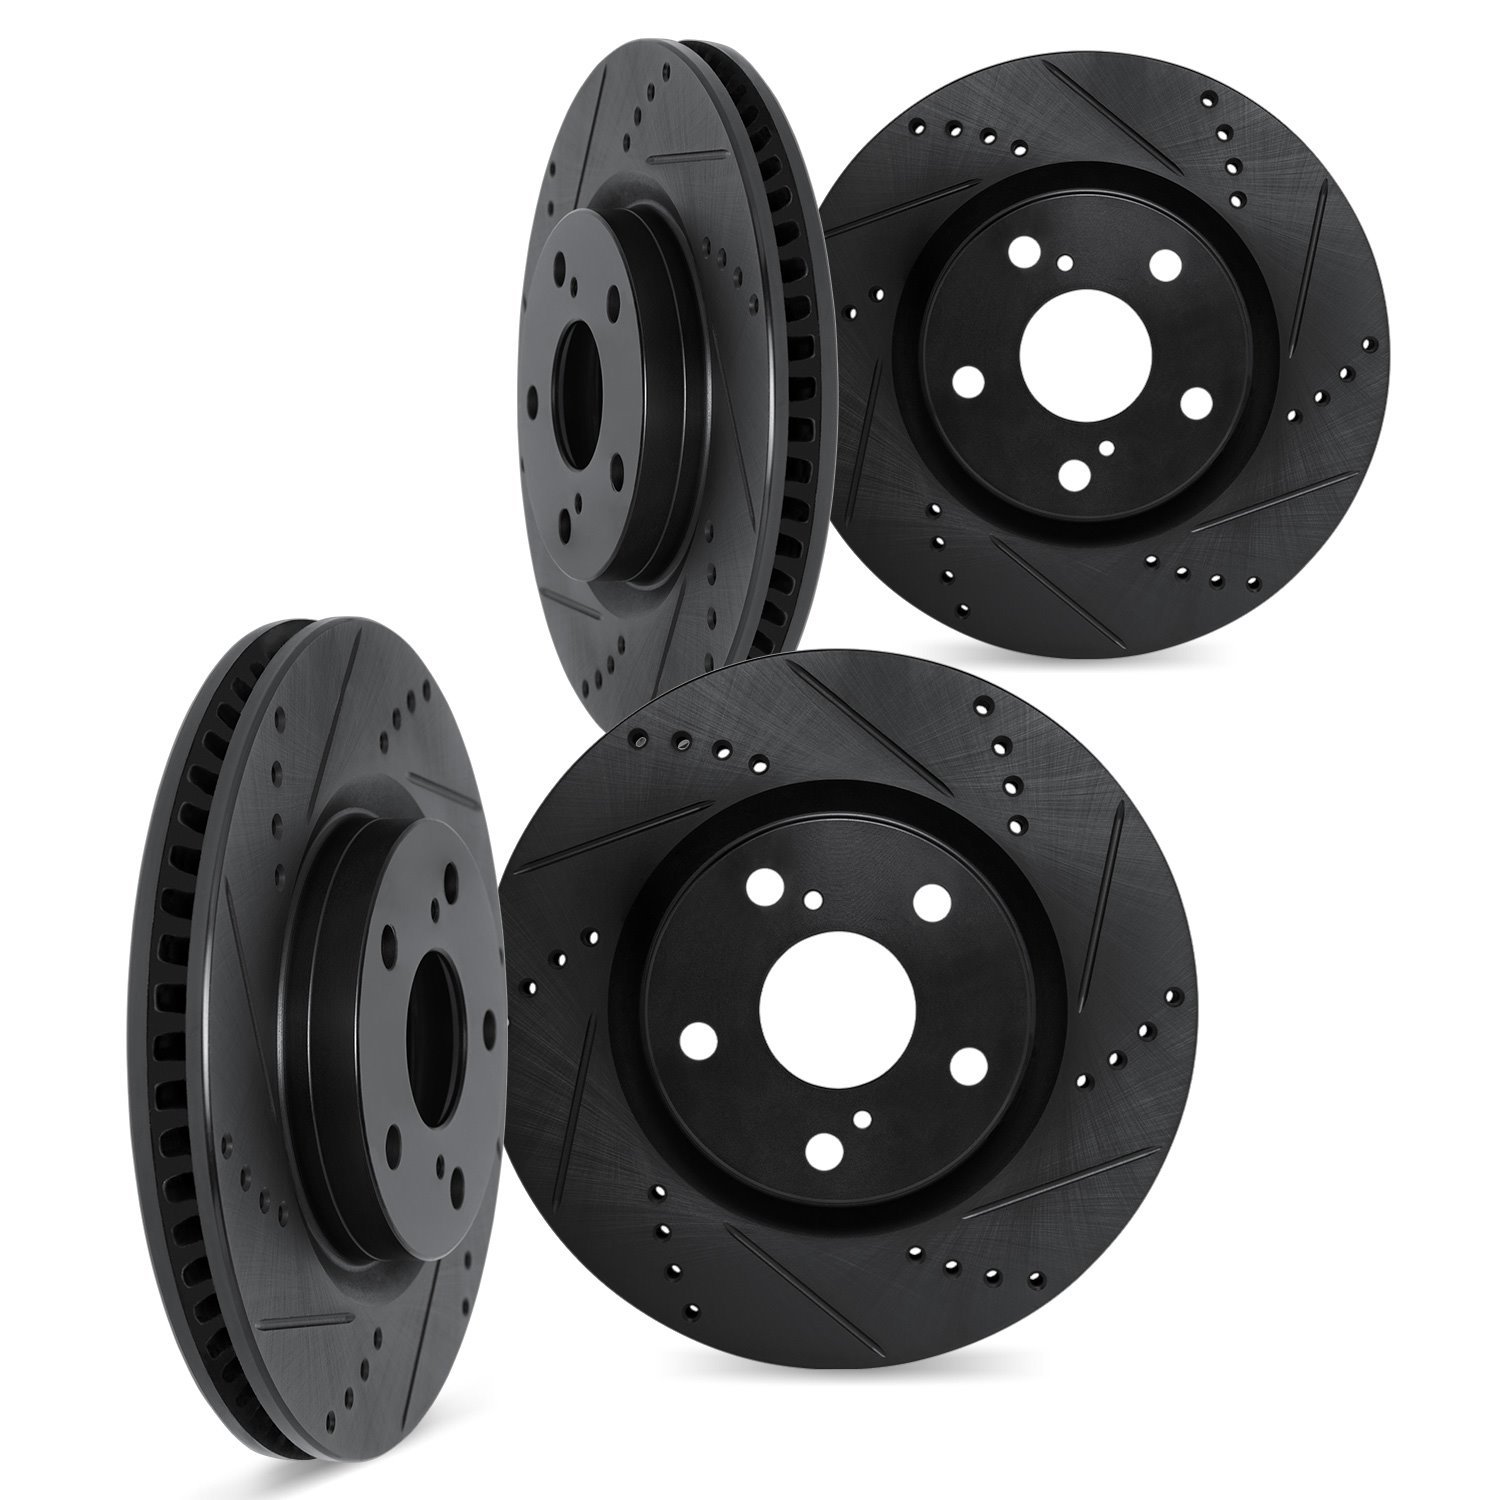 8004-76103 Drilled/Slotted Brake Rotors [Black], Fits Select Lexus/Toyota/Scion, Position: Front and Rear